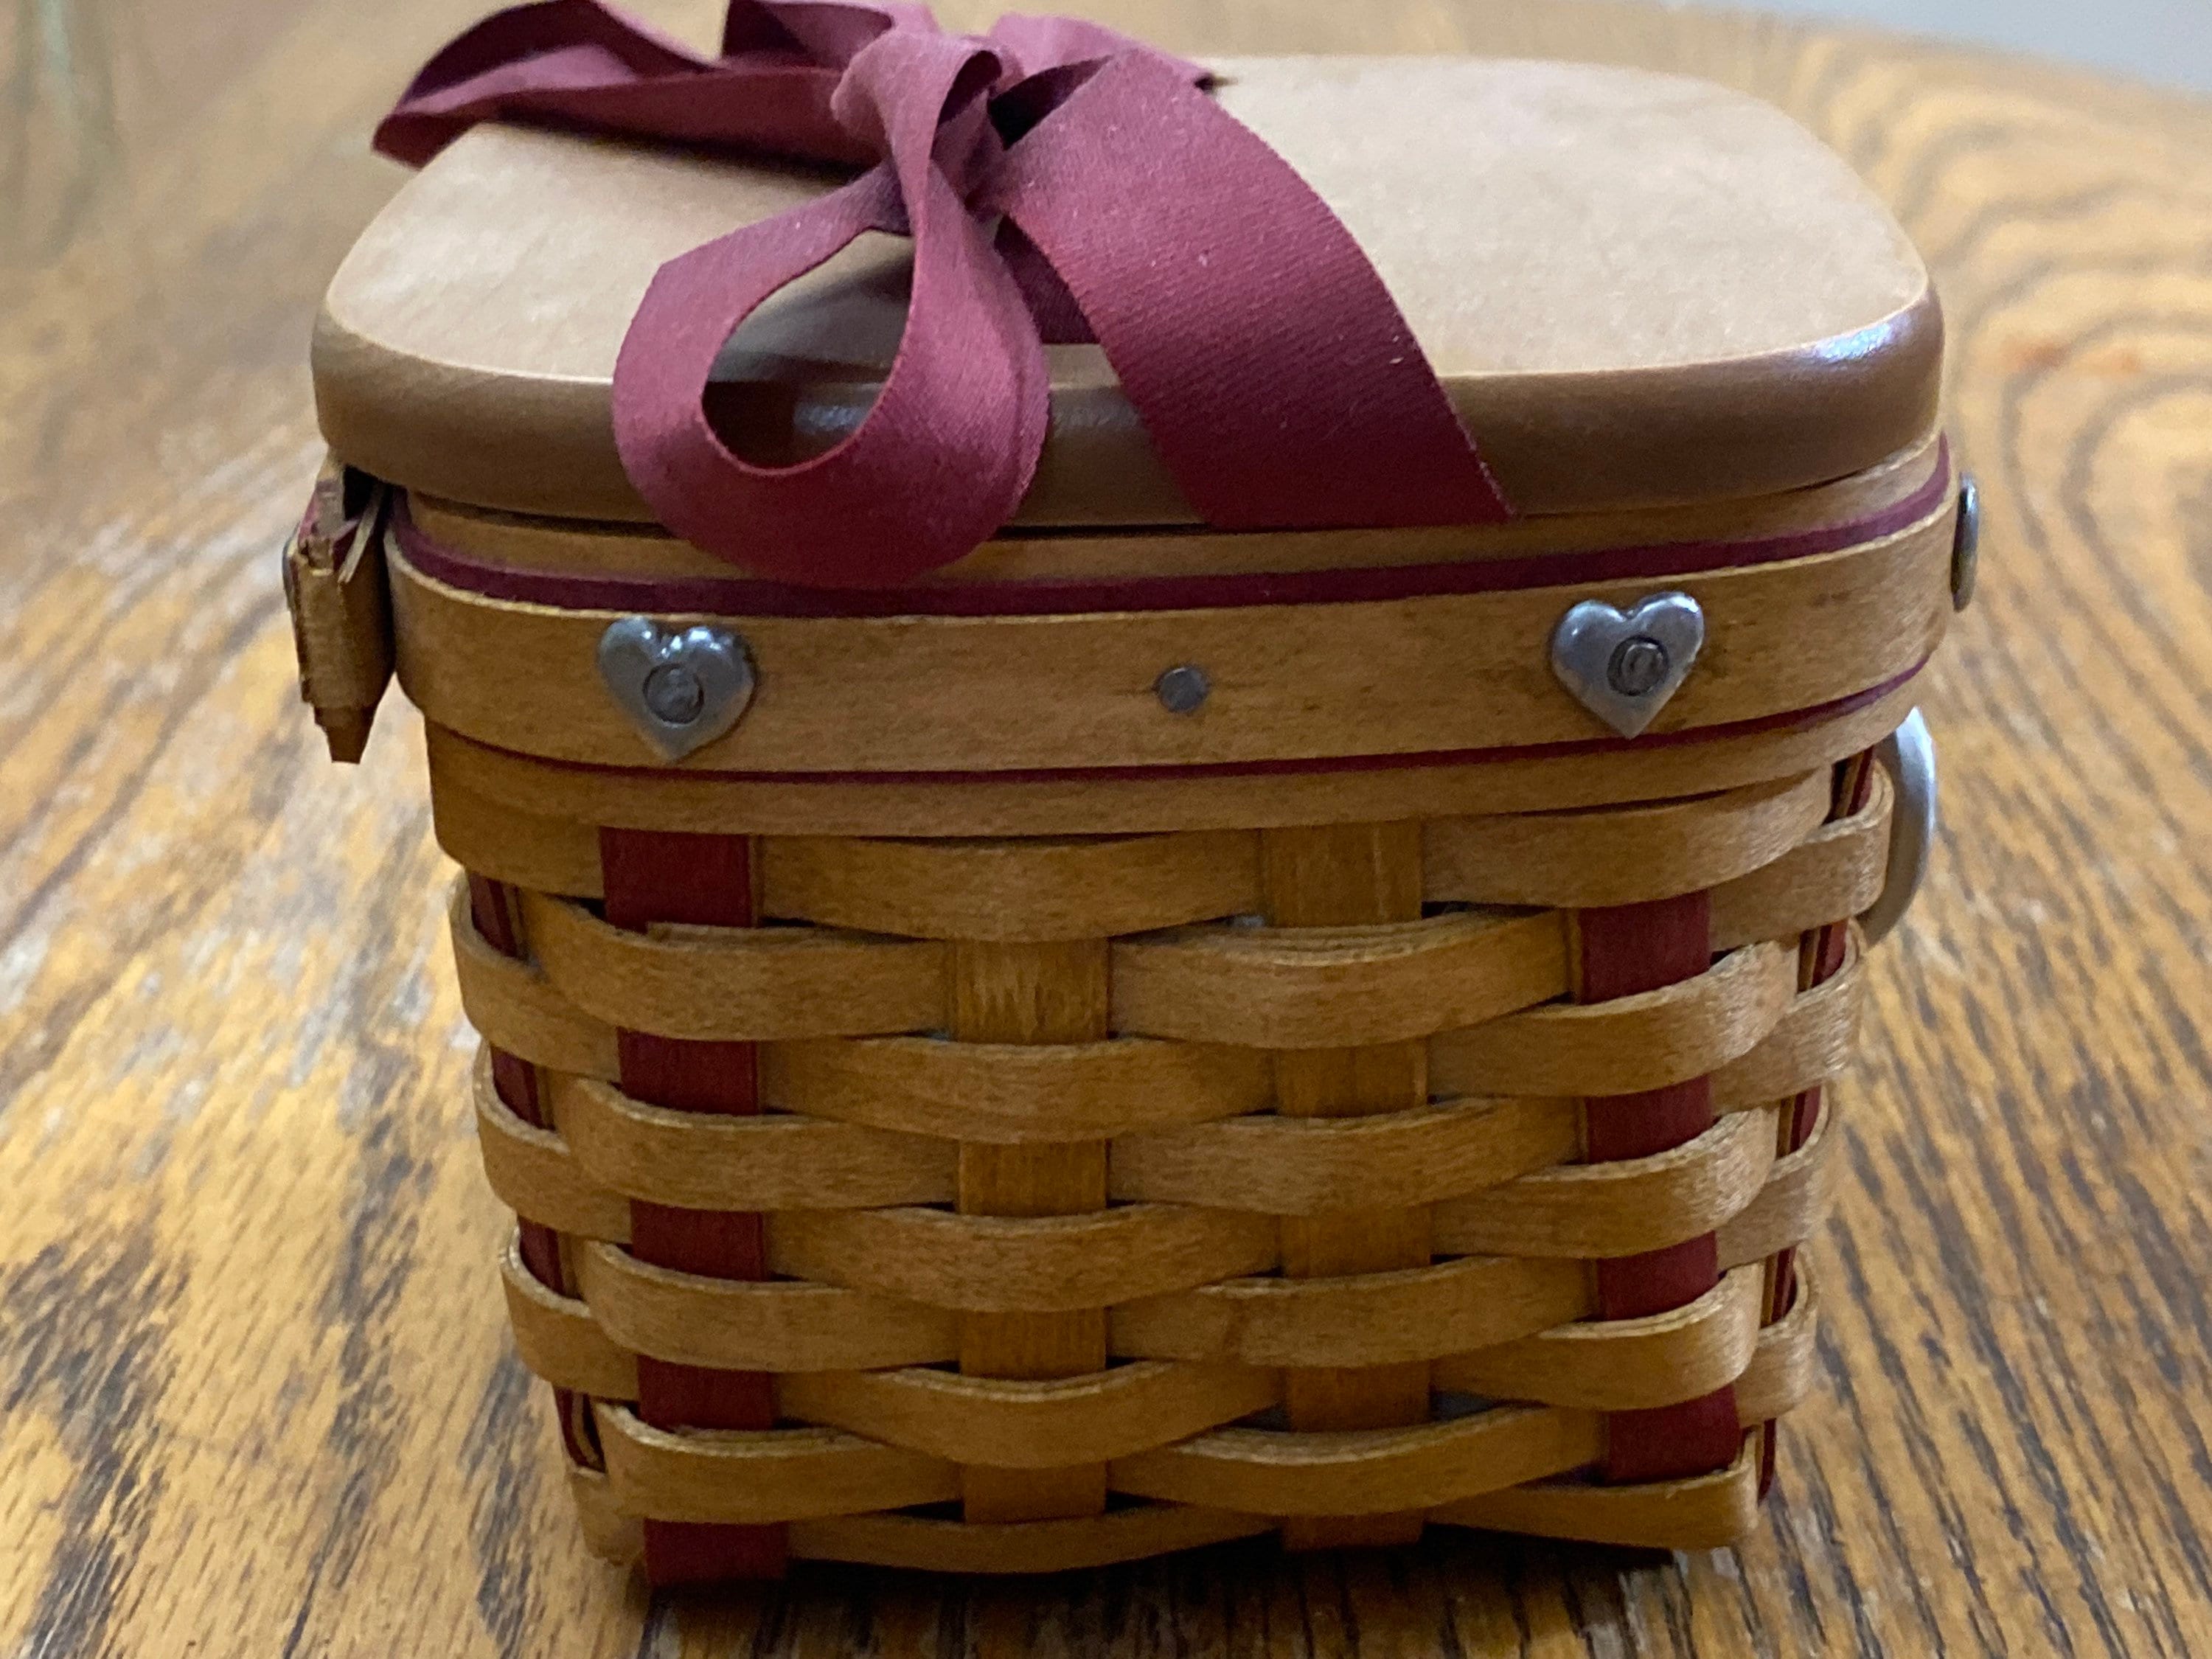 Longaberger The Sweetest Gift Hand-Woven Wood Gift Basket Lid & Let me call you swetheart Liner with Lid.